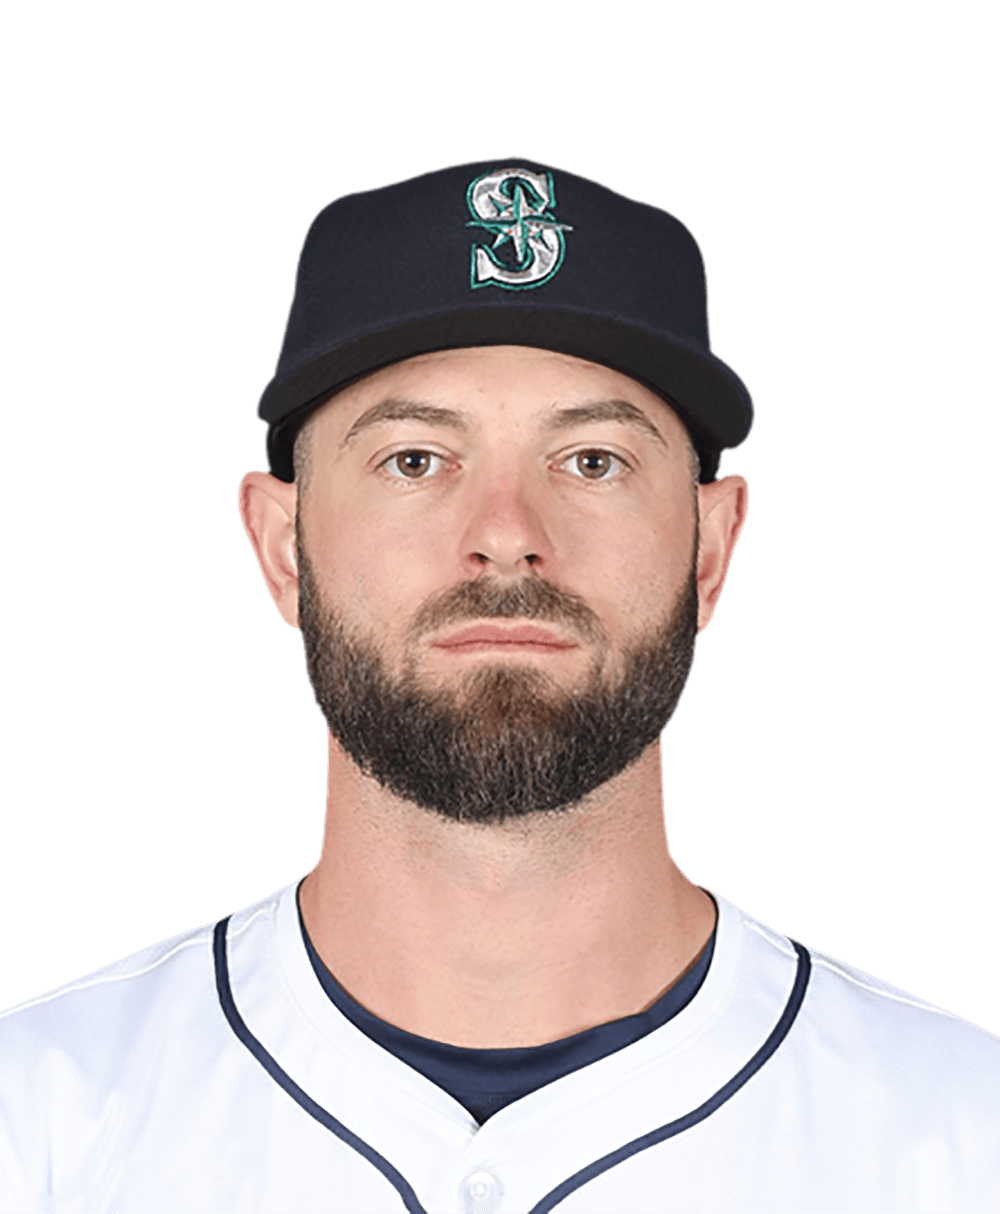 Mariners' Mitch Haniger brings game to Hawaii